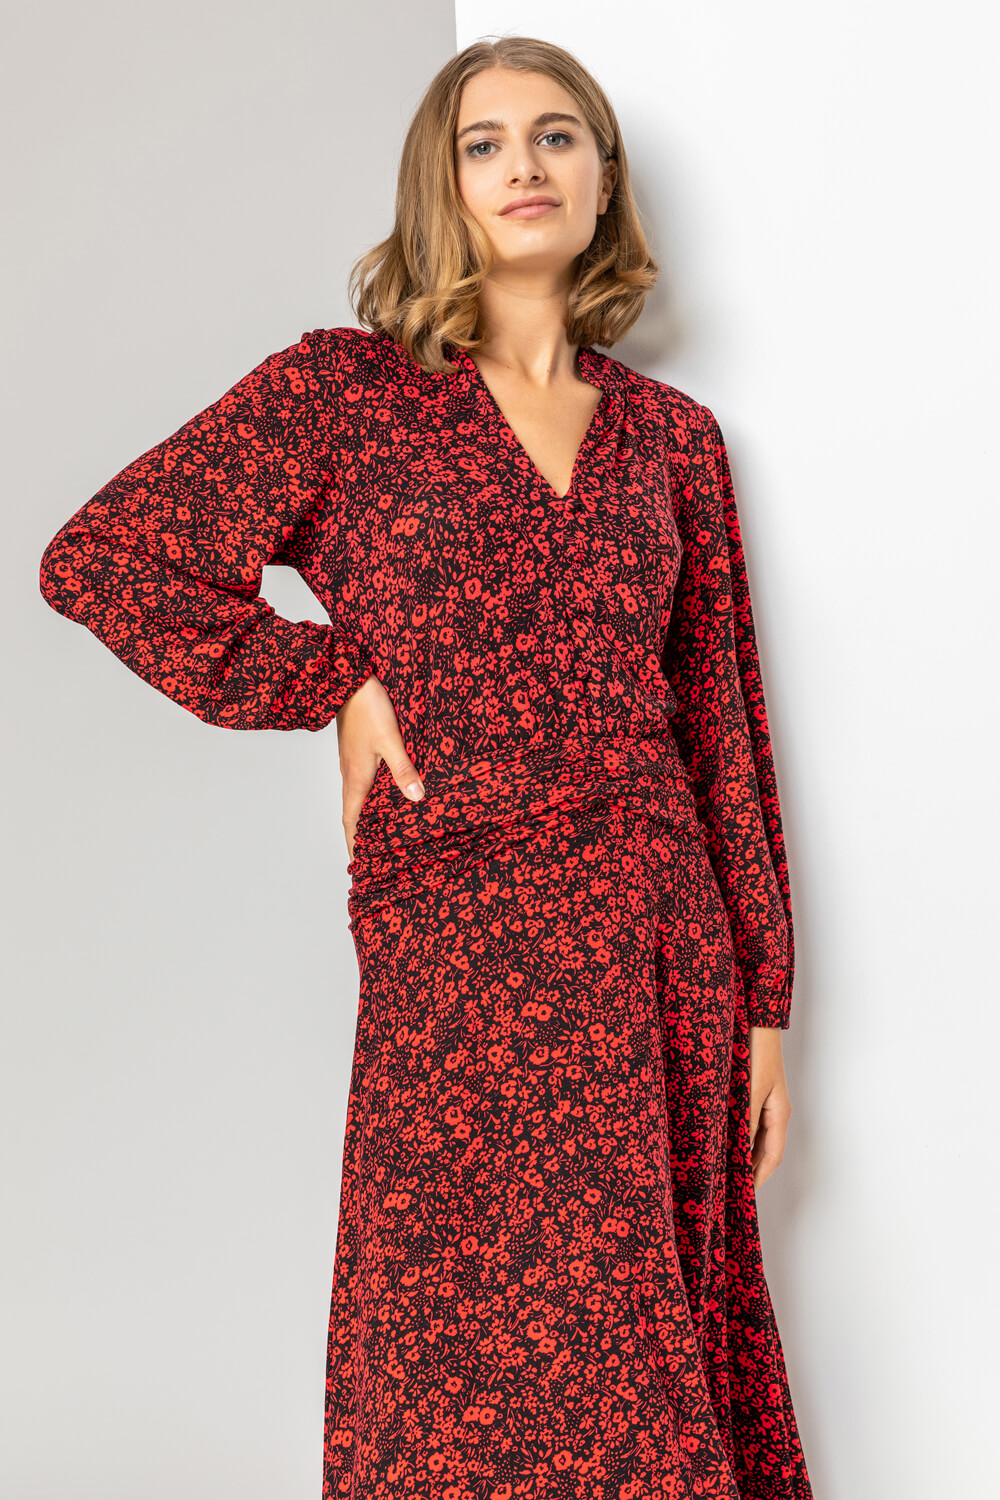 Red Floral Print Pleat Detail Midi Dress, Image 3 of 4